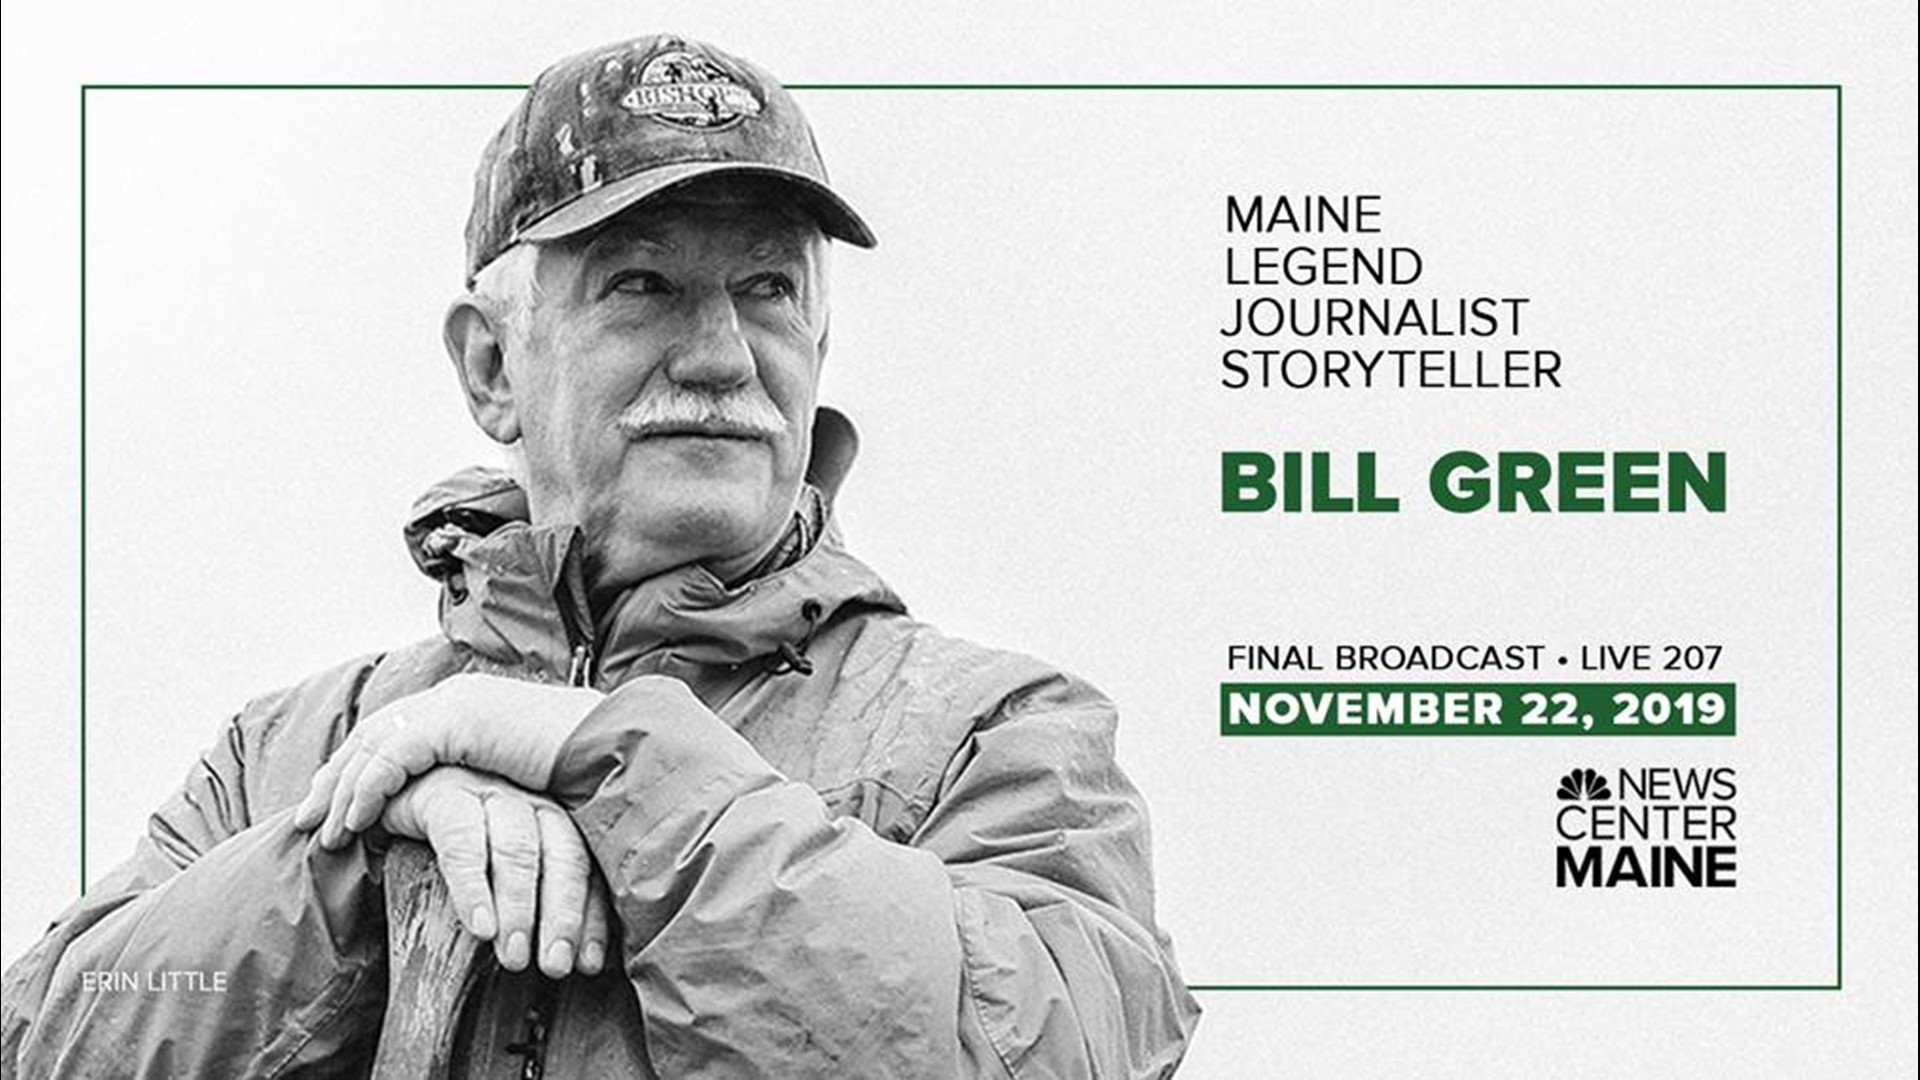 He started as a cameraman at WLBZ 2 in Bangor in 1972 while attending UMO Full time. 47 years later, we celebrate Bill Green’s legendary career